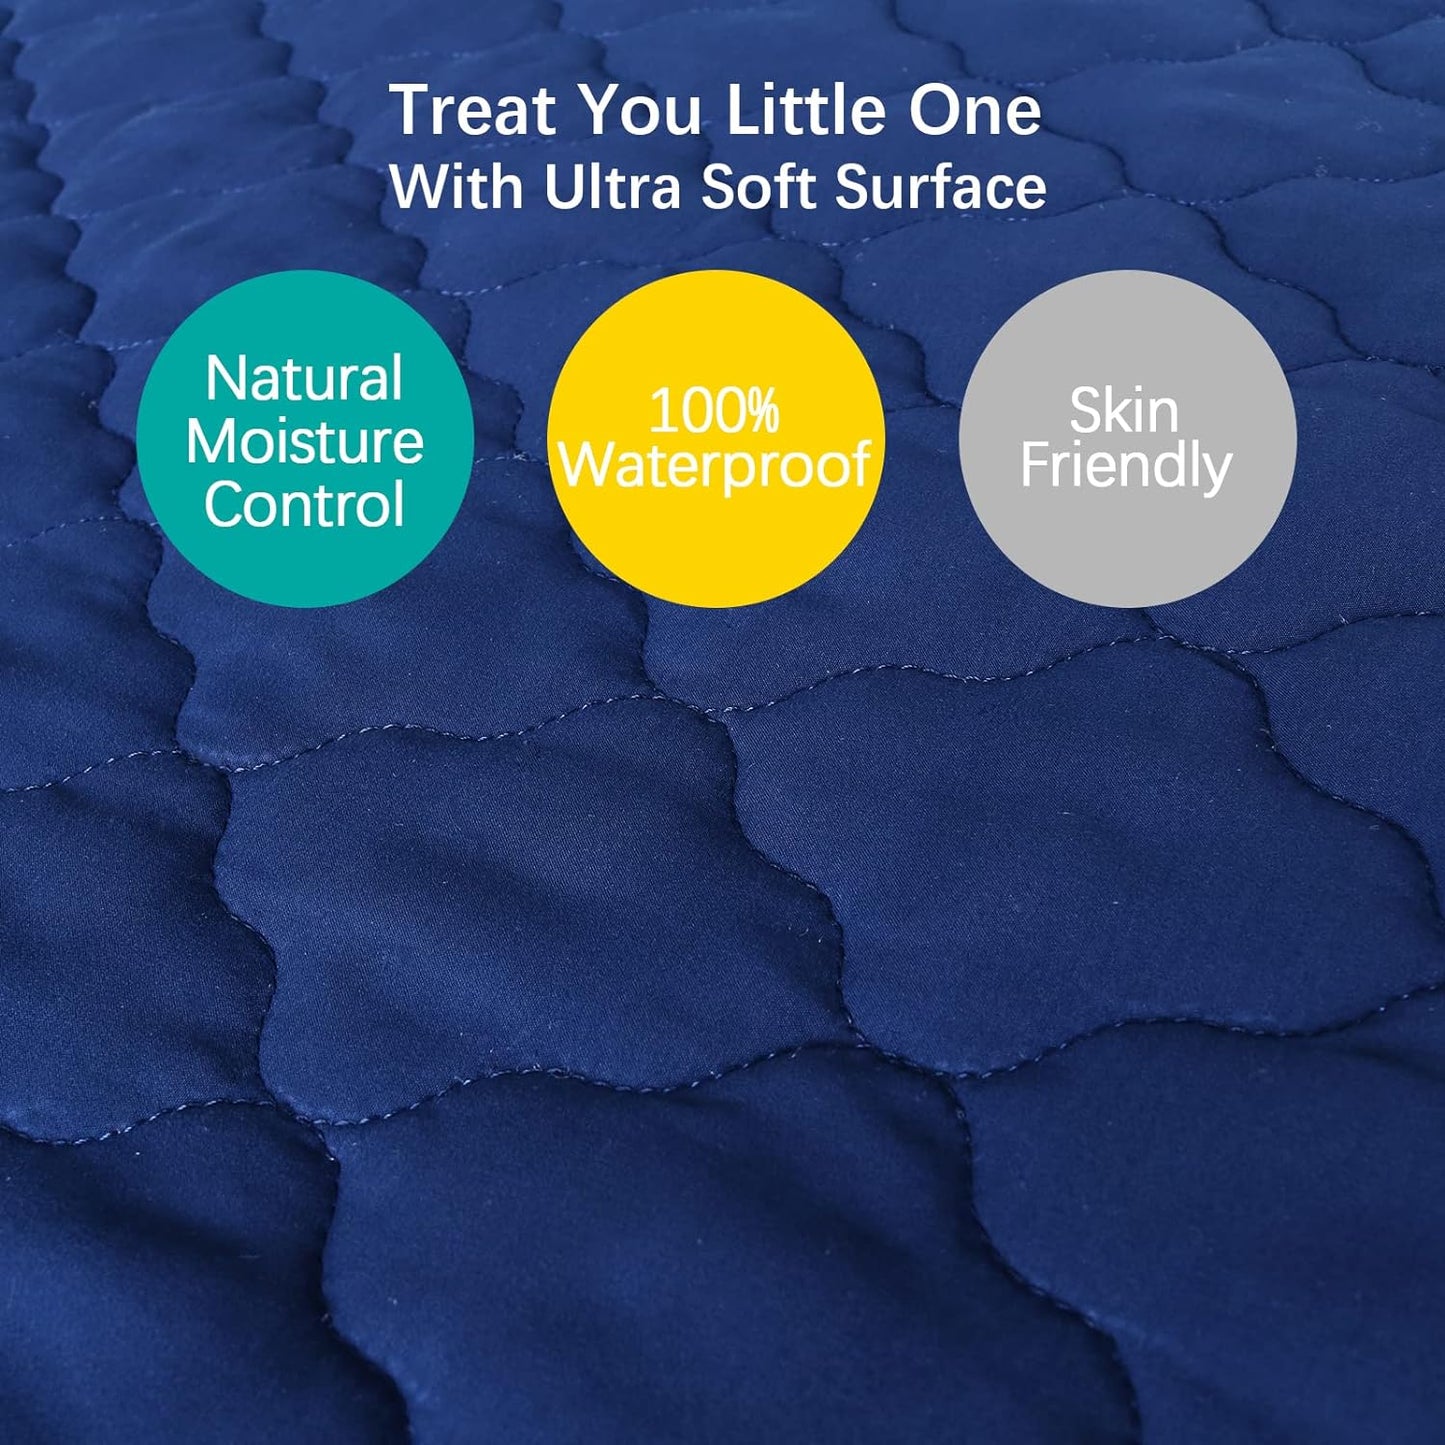 Crib Mattress Protector/ Pad Cover - 2 Pack, Ultra Soft Microfiber, Waterproof, Grey & Navy (for Standard Crib/ Toddler Bed)